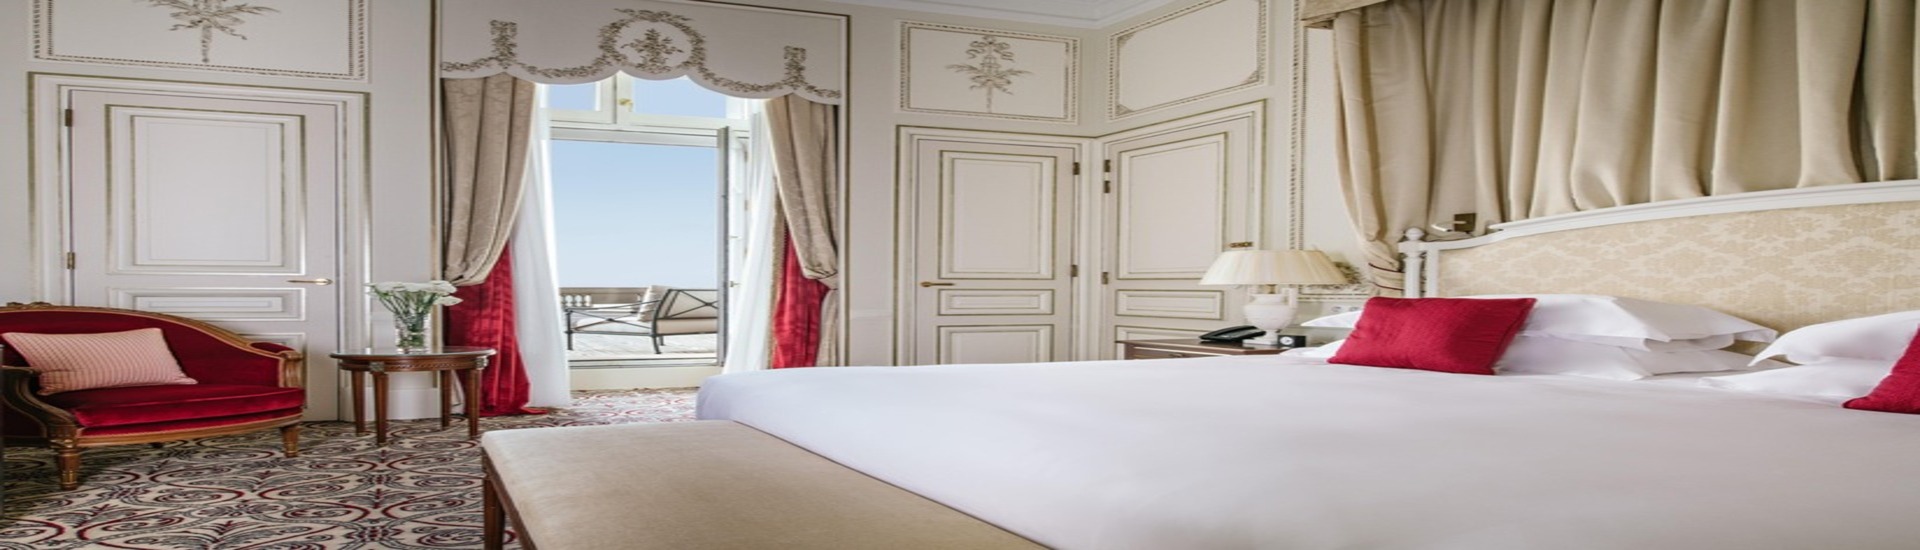 Book a wonderful escape in Biarritz! Enjoy our exceptional Suites